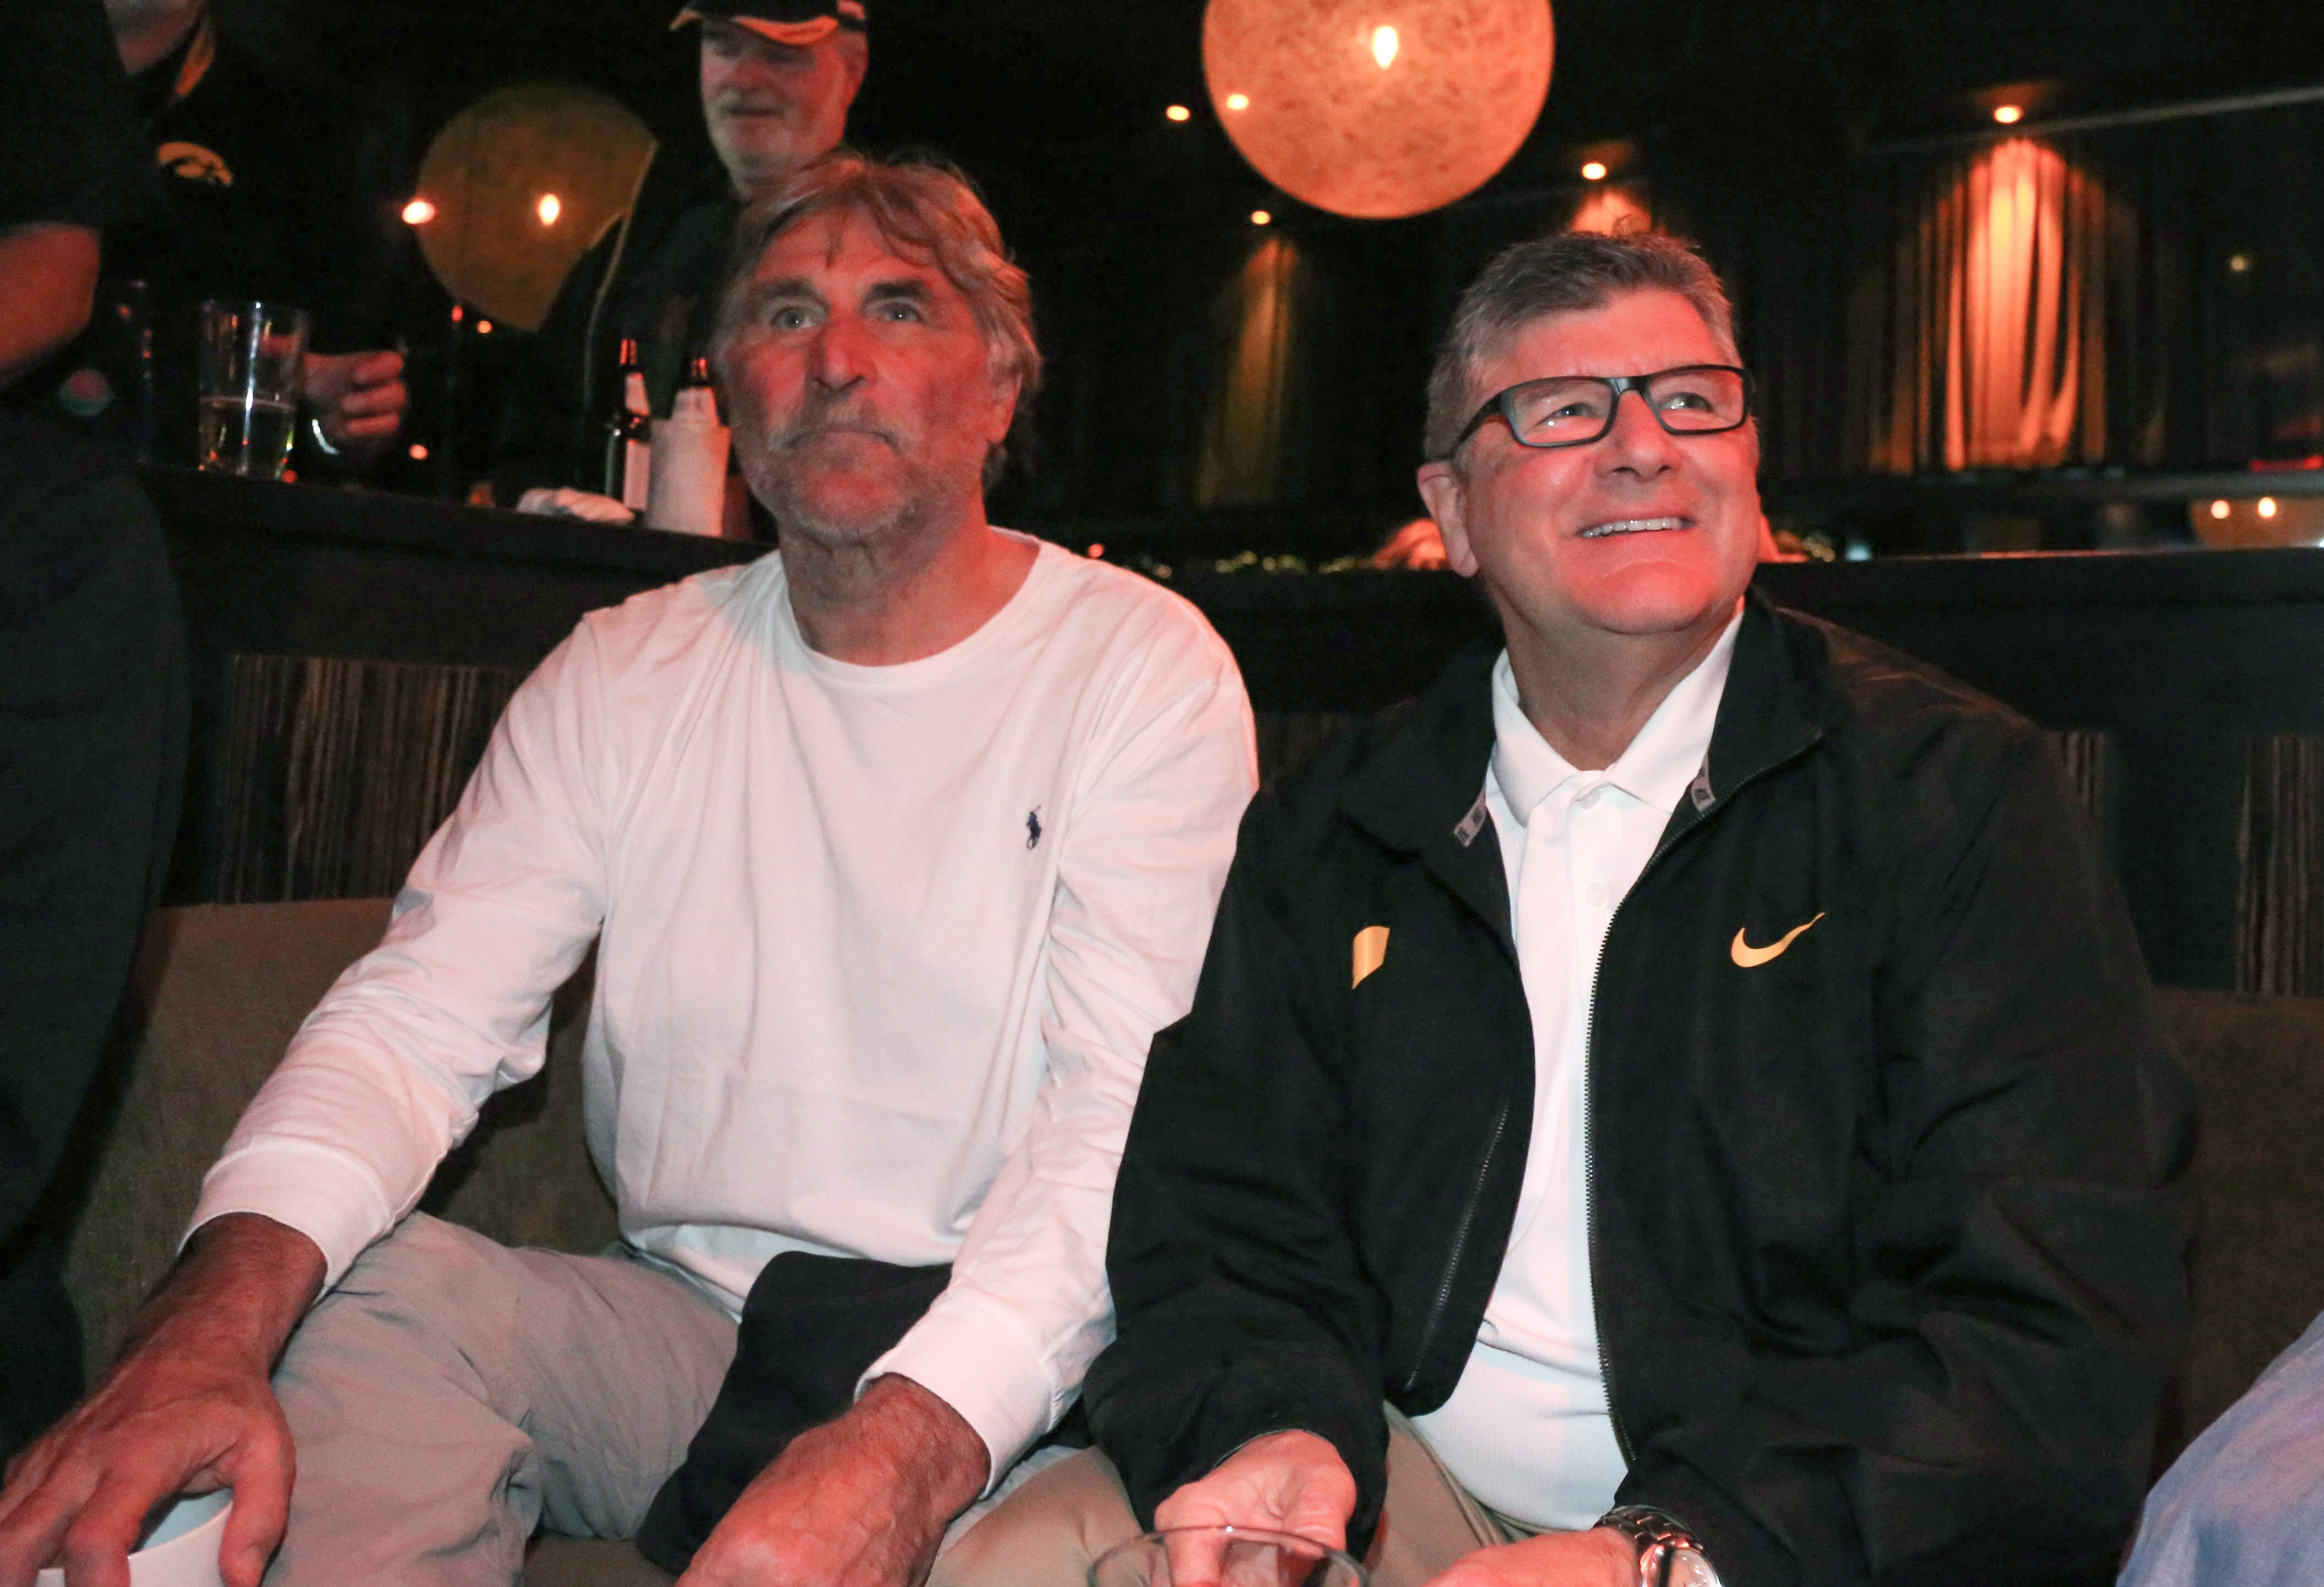 From 2015: Iowa Hawkeye broadcasters Ed Podolak, left, and Gary Dolphin watch the Iowa men's basketball team extend a lead against Michigan State from a watch party on Dec. 29, 2015, at Lucky Strike Live in Los Angeles. The Hawkeyes football team was days away from playing in the Rose Bowl, against Stanford, in Pasadena.